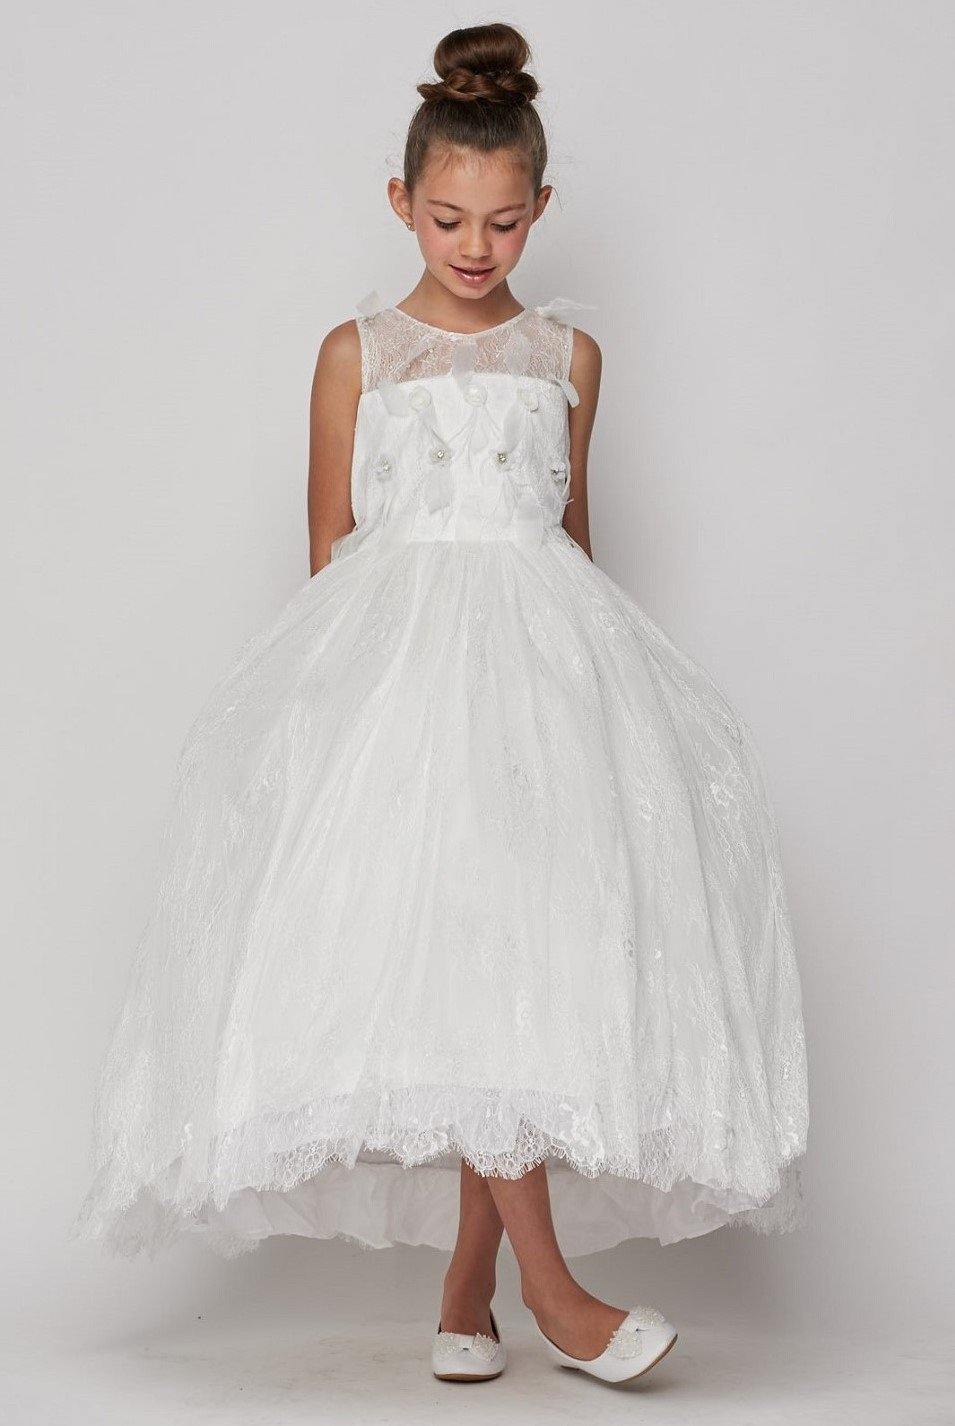 Illusion Neckline Lace Flower Girls Dress - The Dress Outlet Cinderella Couture